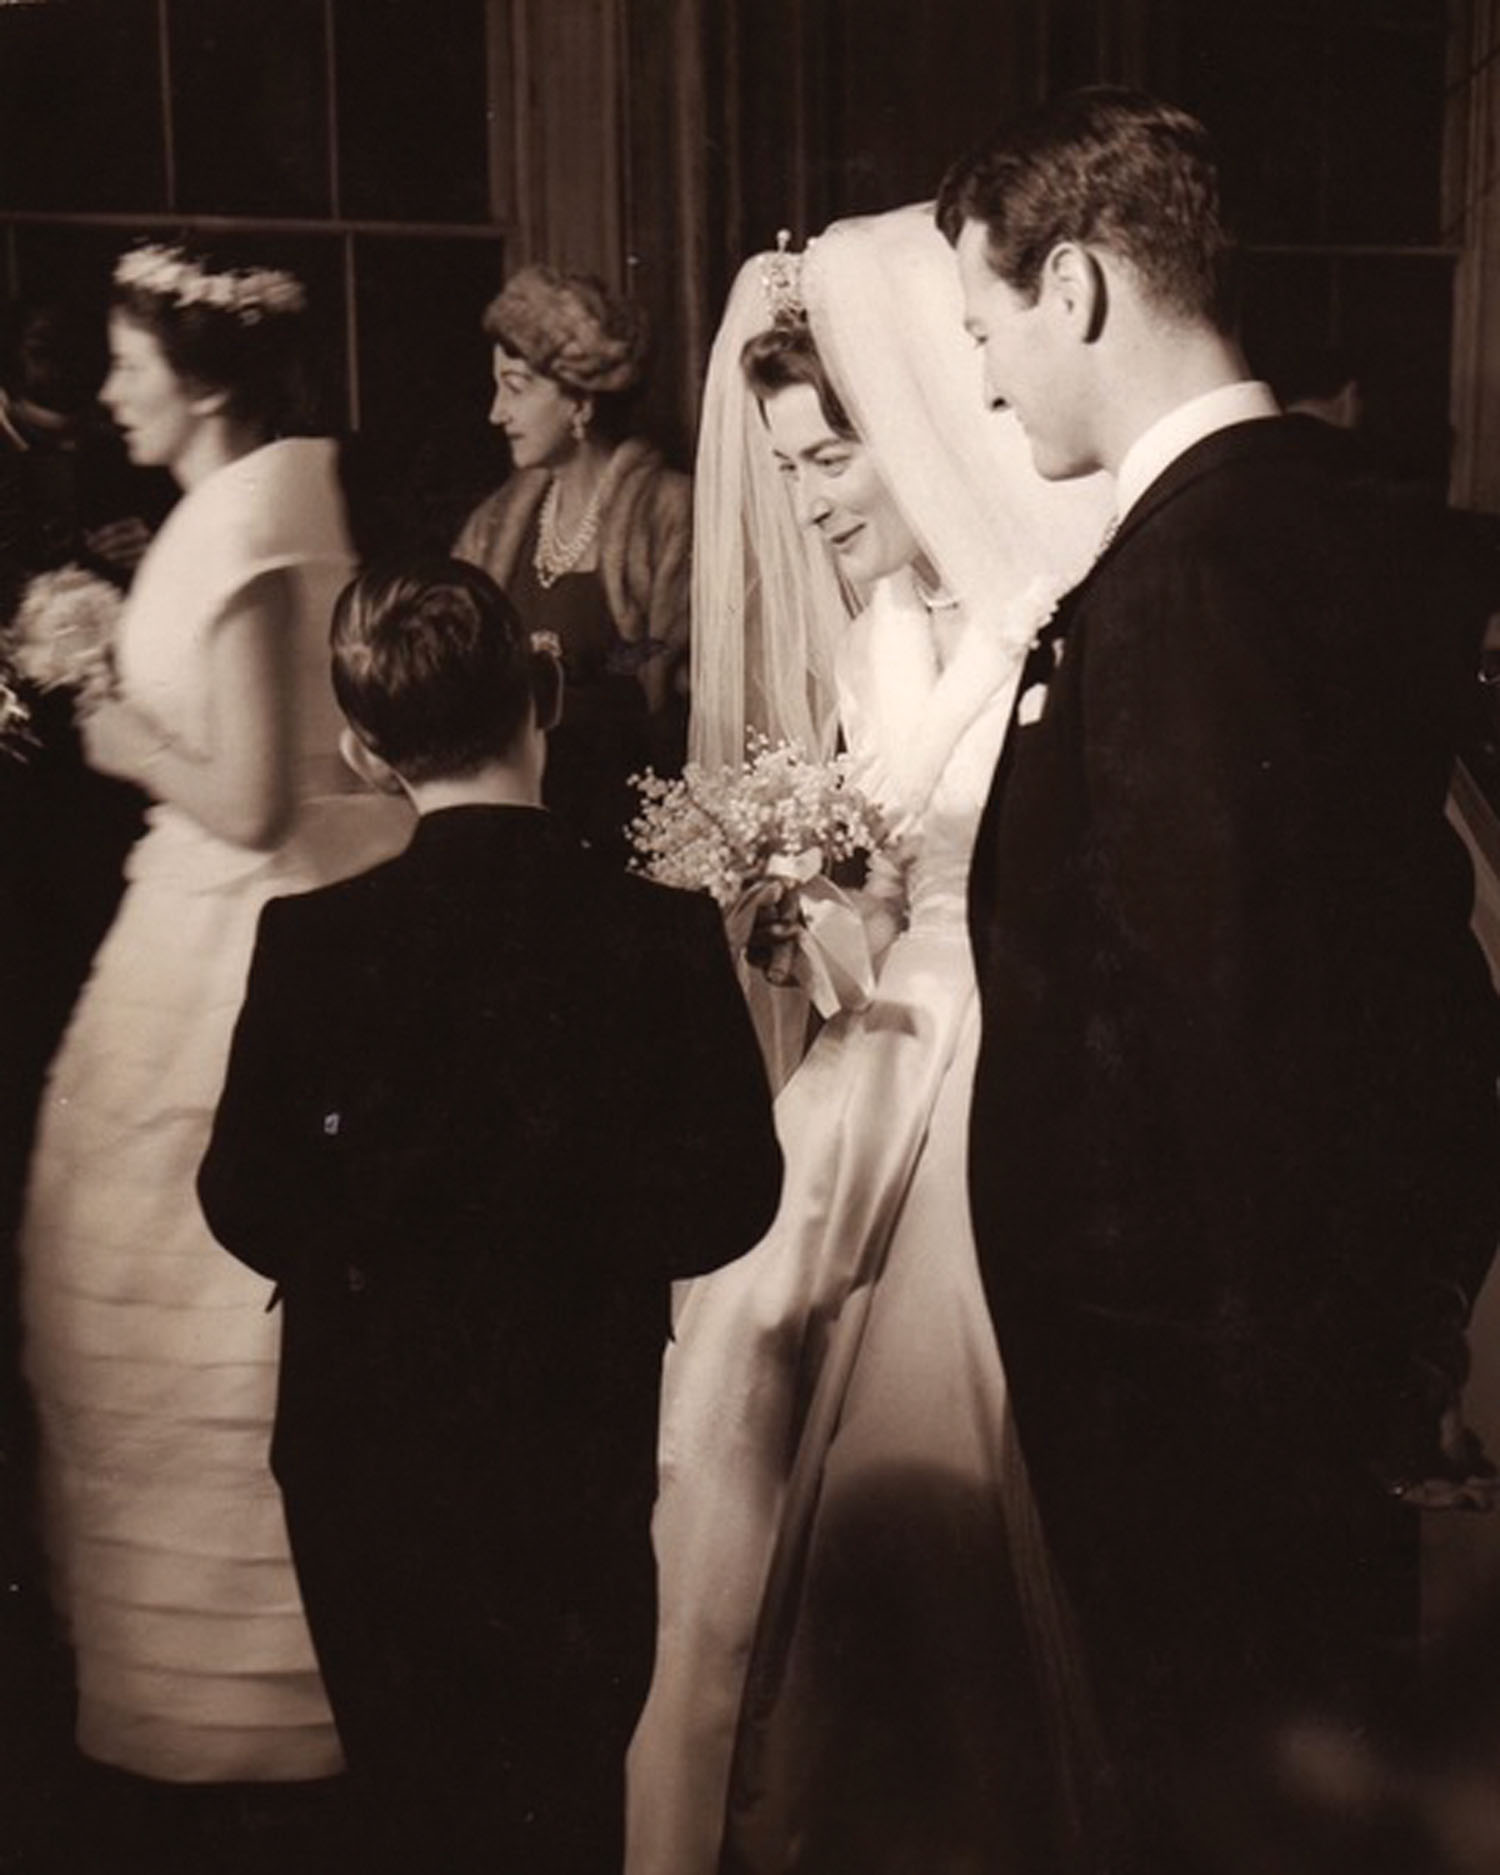 A vintage photo of Lady Pamela’s wedding to interior designer David Hicks includes her bouquet of lilies of the valley from Pulbrook & Gould, the same London floral firm that conceived India’s wedding bouquets.